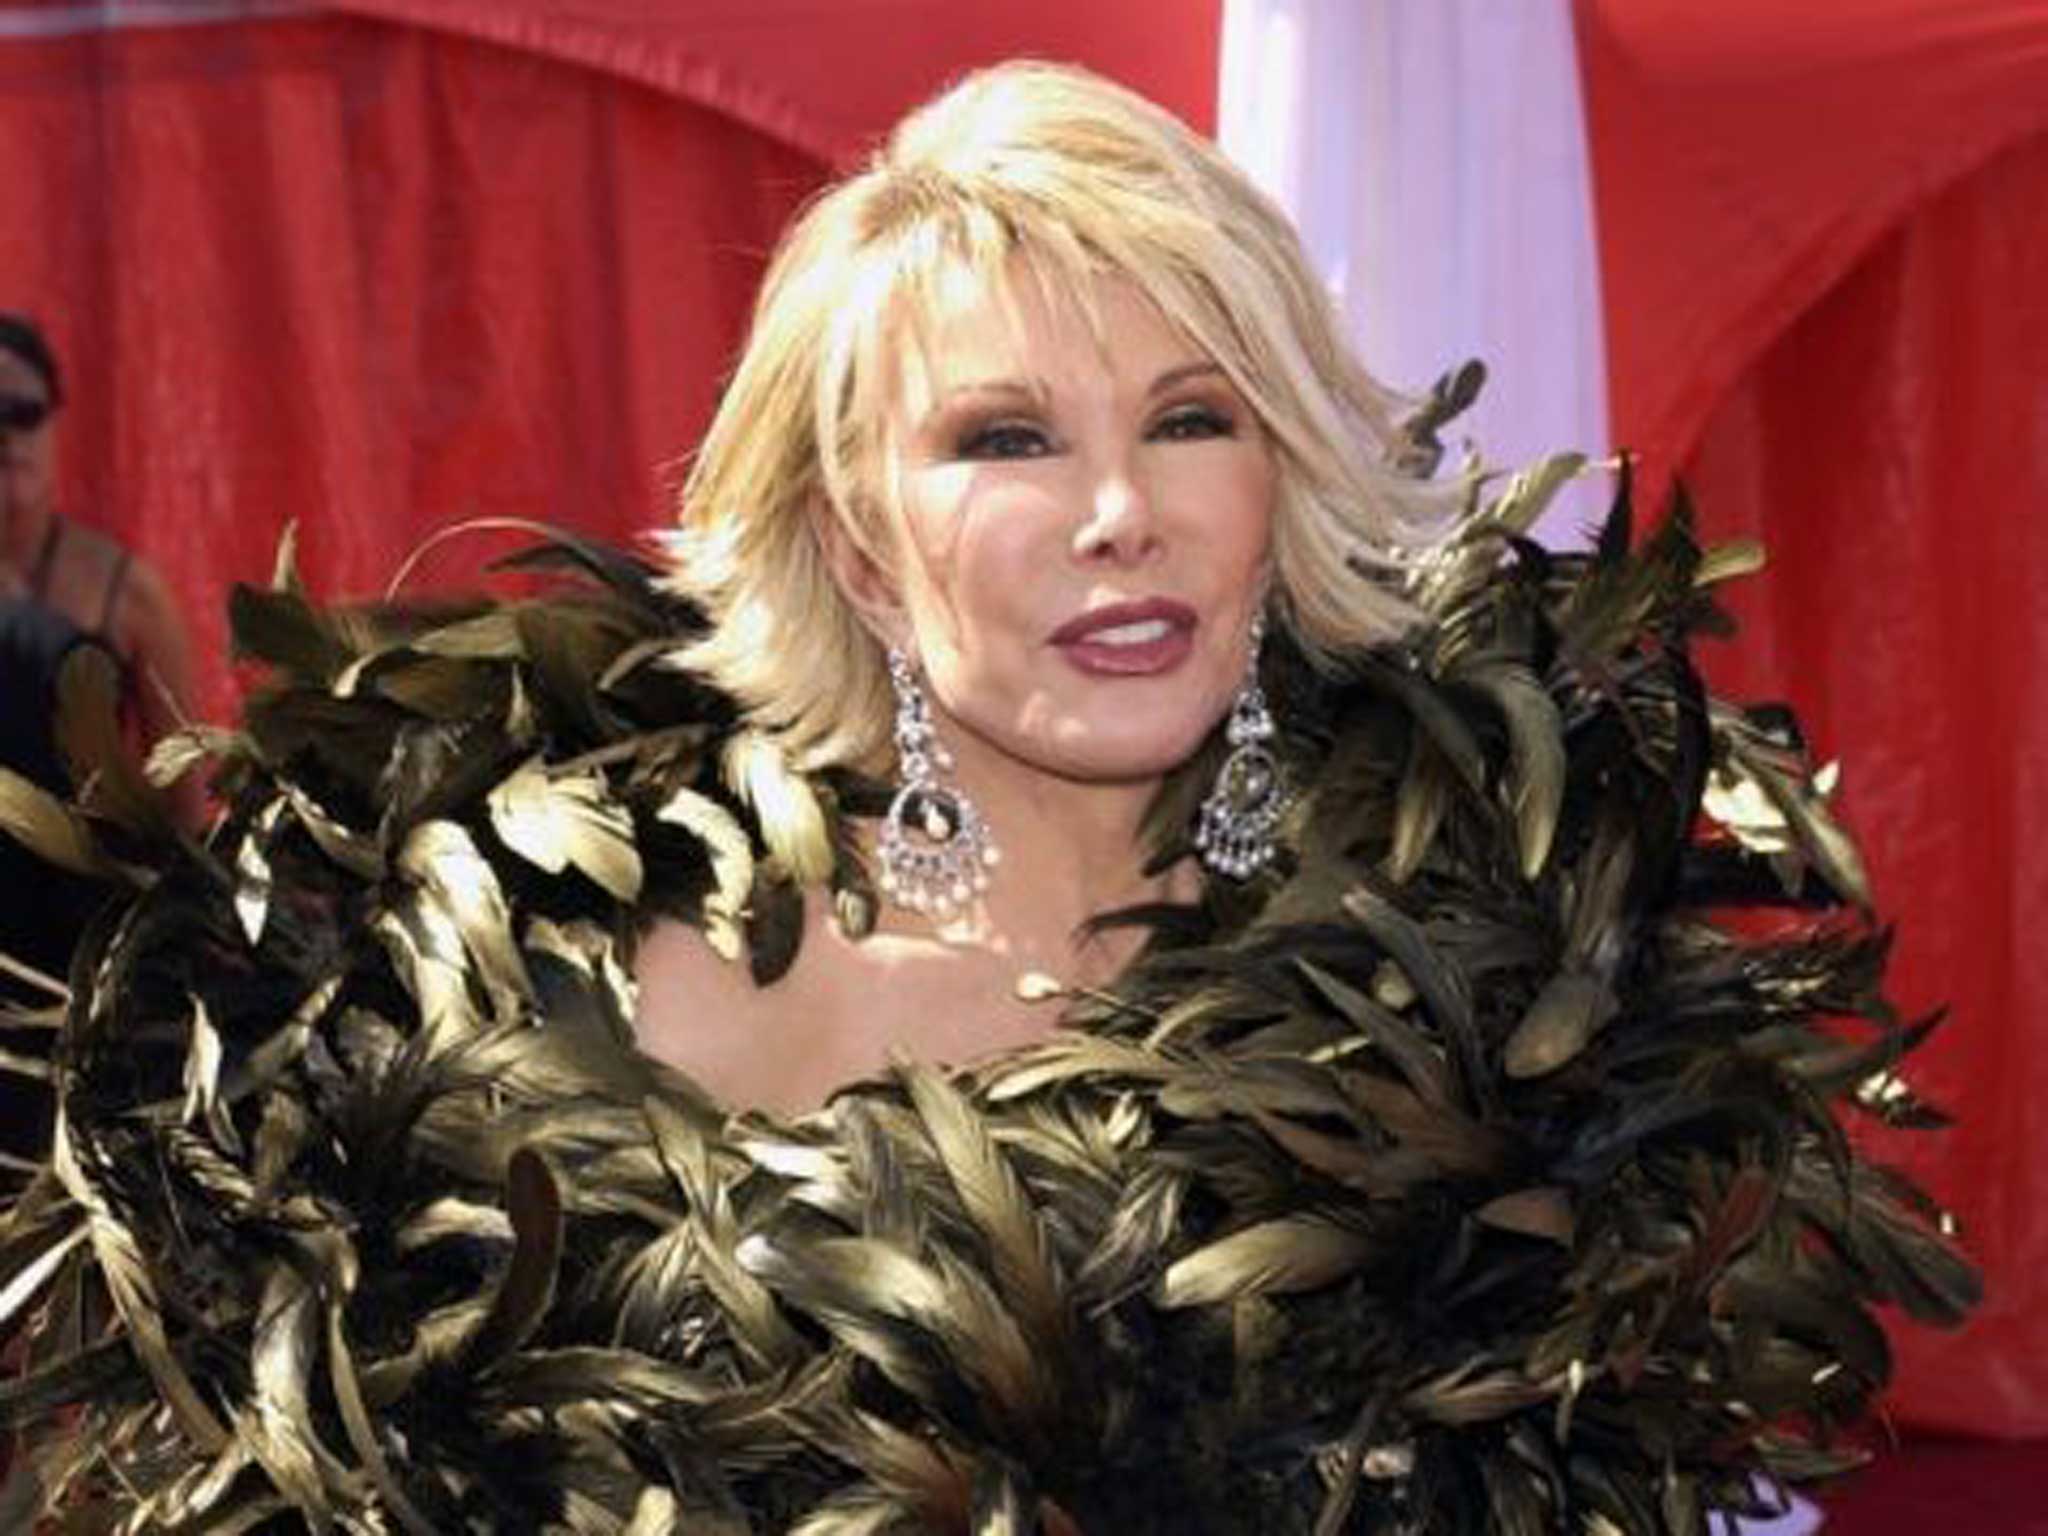 Joan Rivers arrives at the 55th Annual Primetime Emmy Awards in 2003